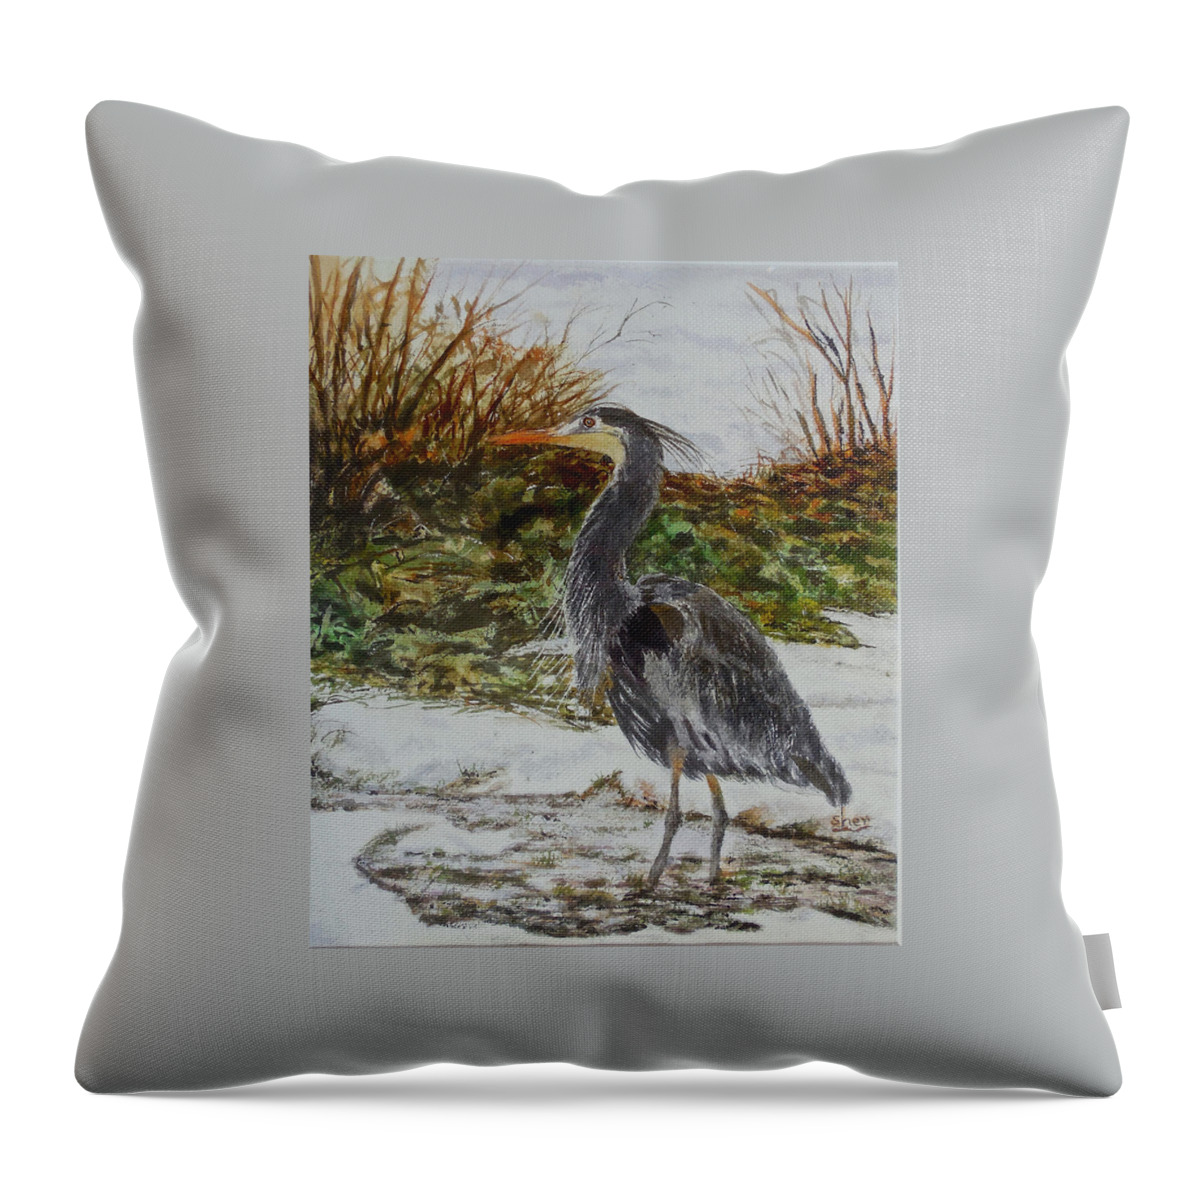 Watercolour Painting Throw Pillow featuring the painting Blue Heron by Sher Nasser